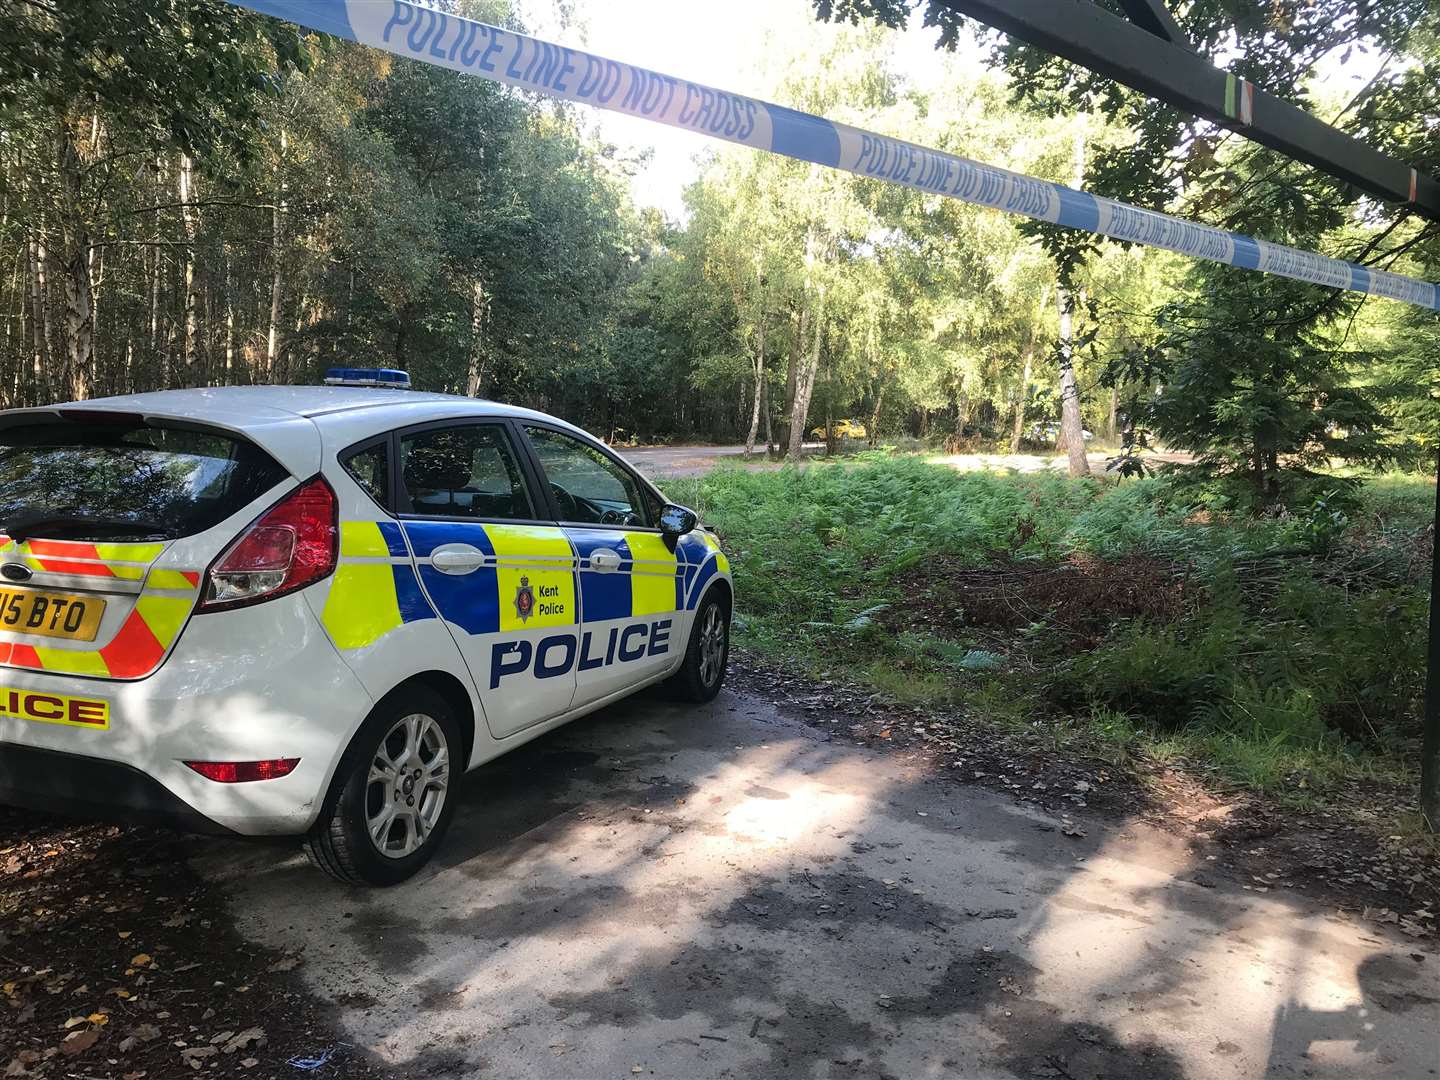 Police have blocked an entrance to Clowes Wood (17774749)